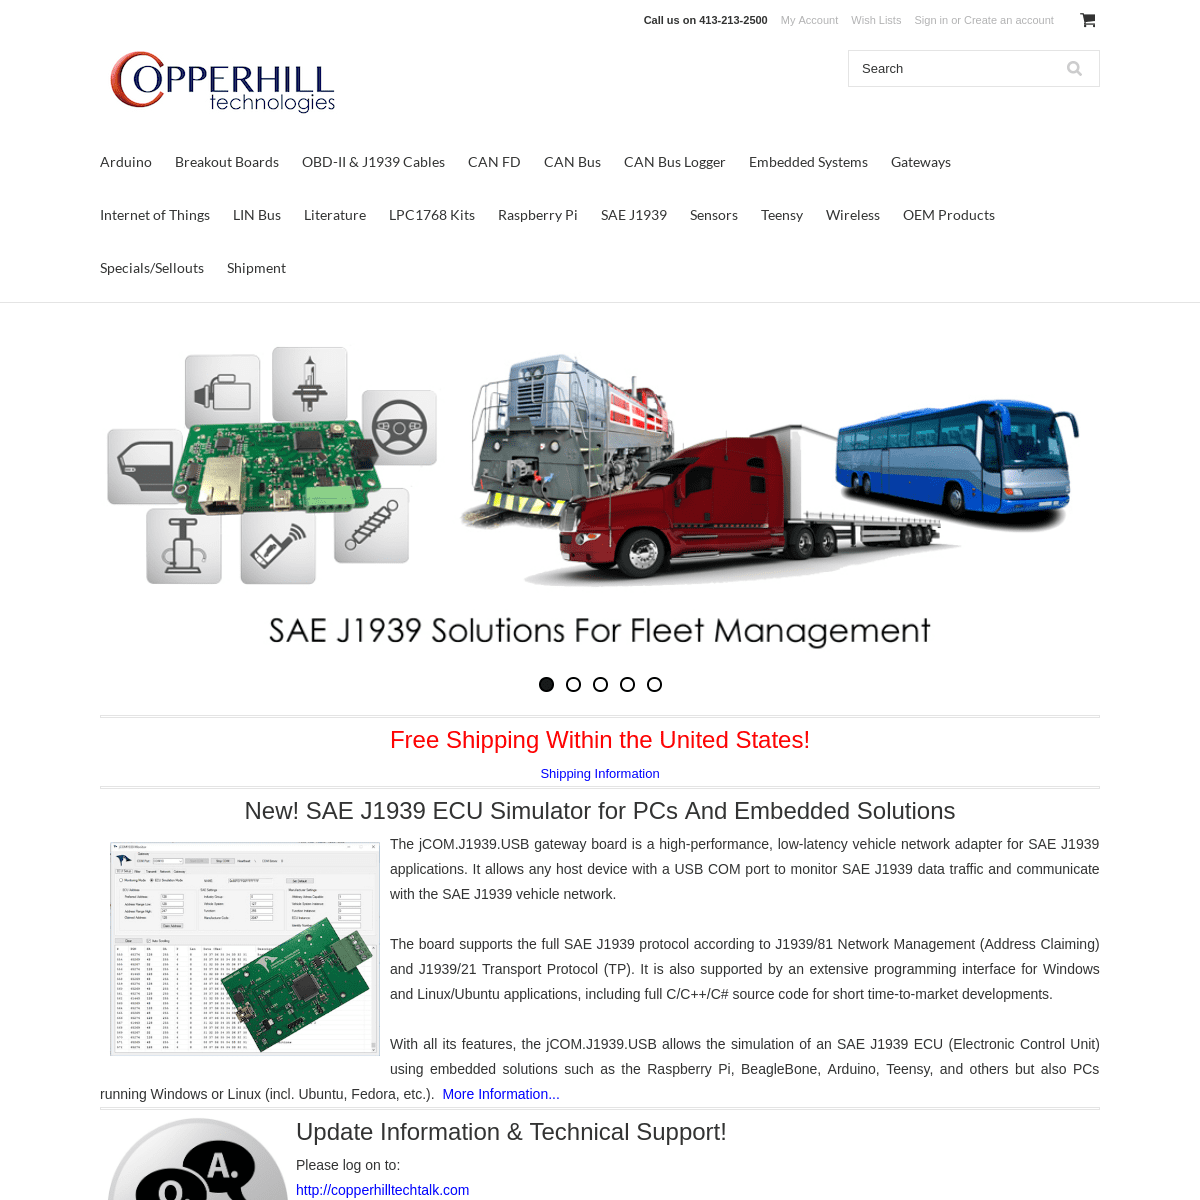 Copperhill Technologies - Automotive, SAE J1939, CAN Bus, Robotics, IoT, Industrial Prototyping